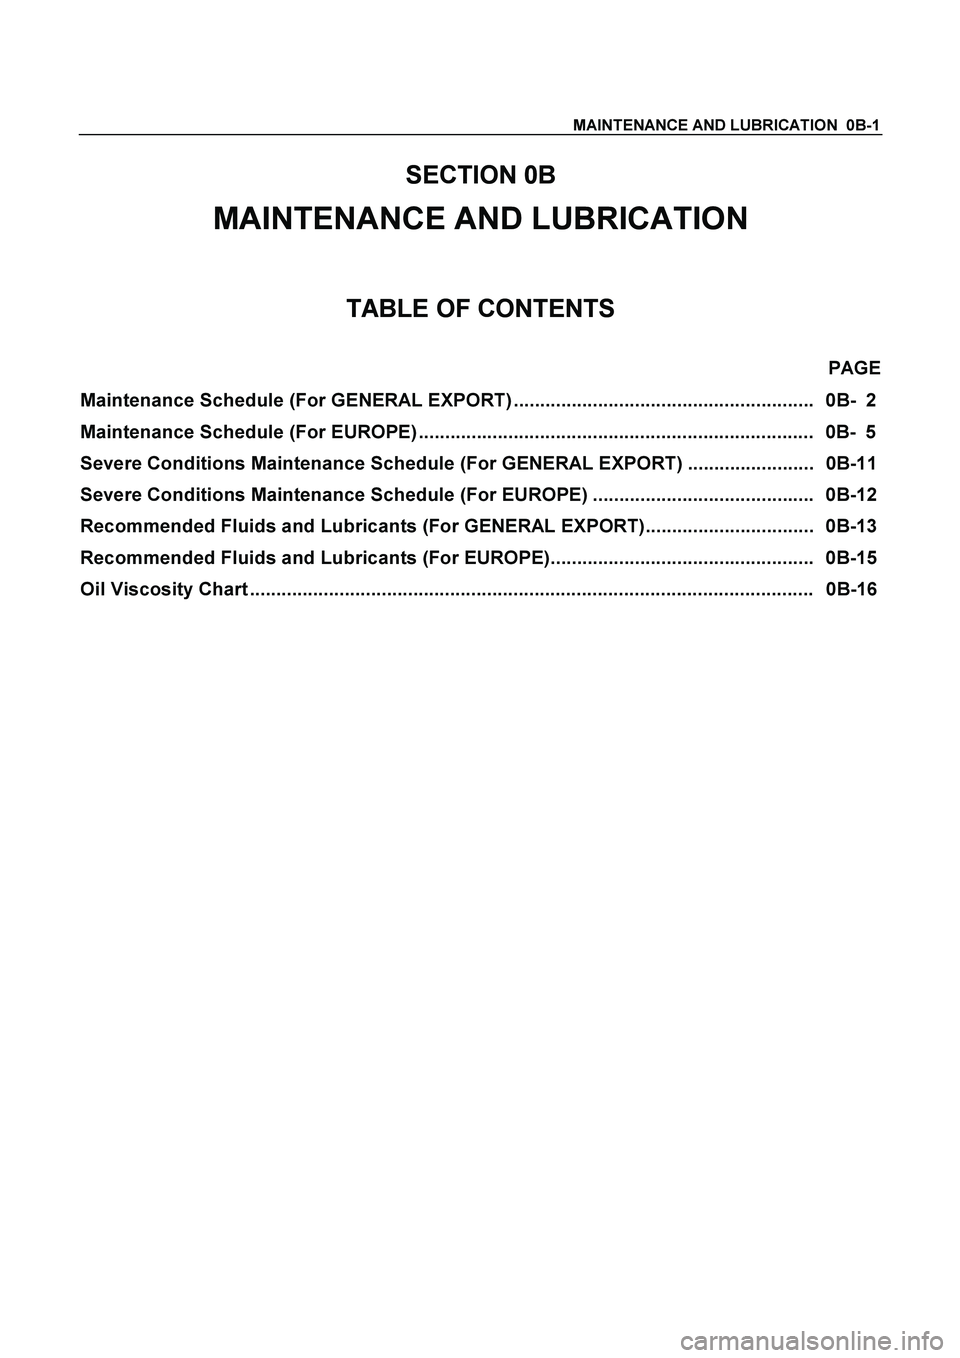 ISUZU TF SERIES 2004  Workshop Manual MAINTENANCE AND LUBRICATION  0B-1 
SECTION 0B 
MAINTENANCE AND LUBRICATION 
TABLE OF CONTENTS 
 PAGE 
Maintenance Schedule (For GENERAL EXPORT) ........................................................